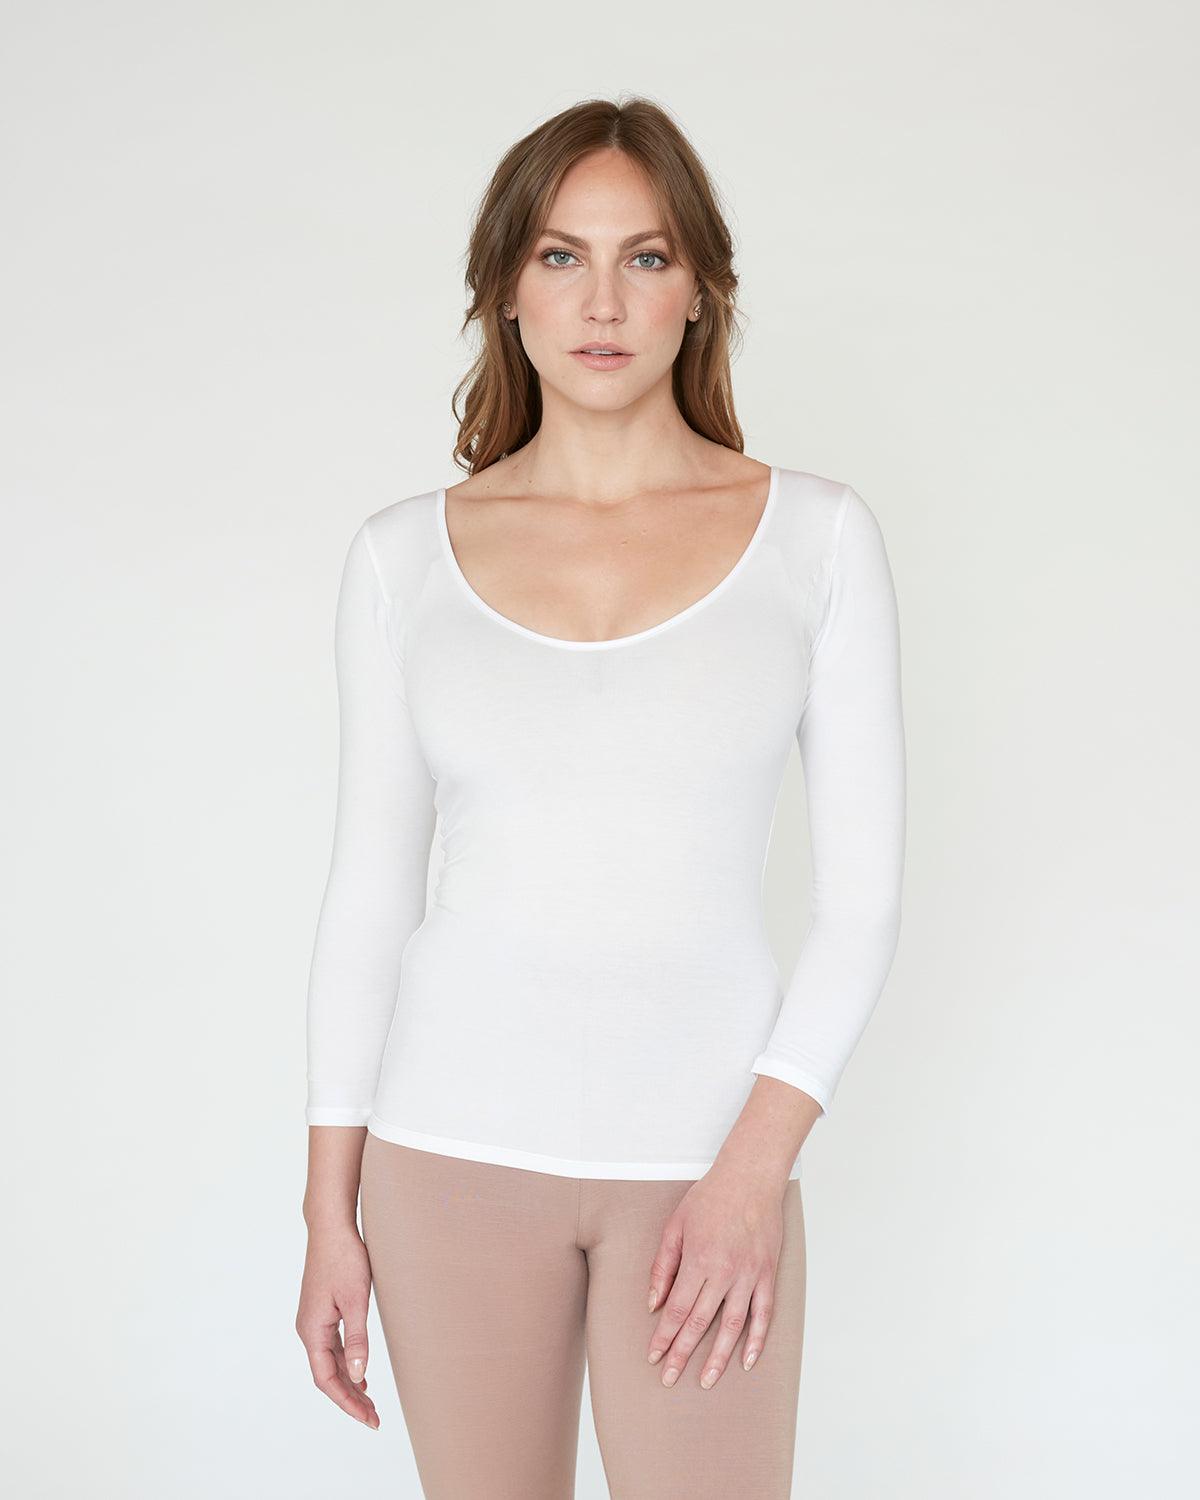 "#color_WHITE|Siobhan is 5'8.5" and wears a size S